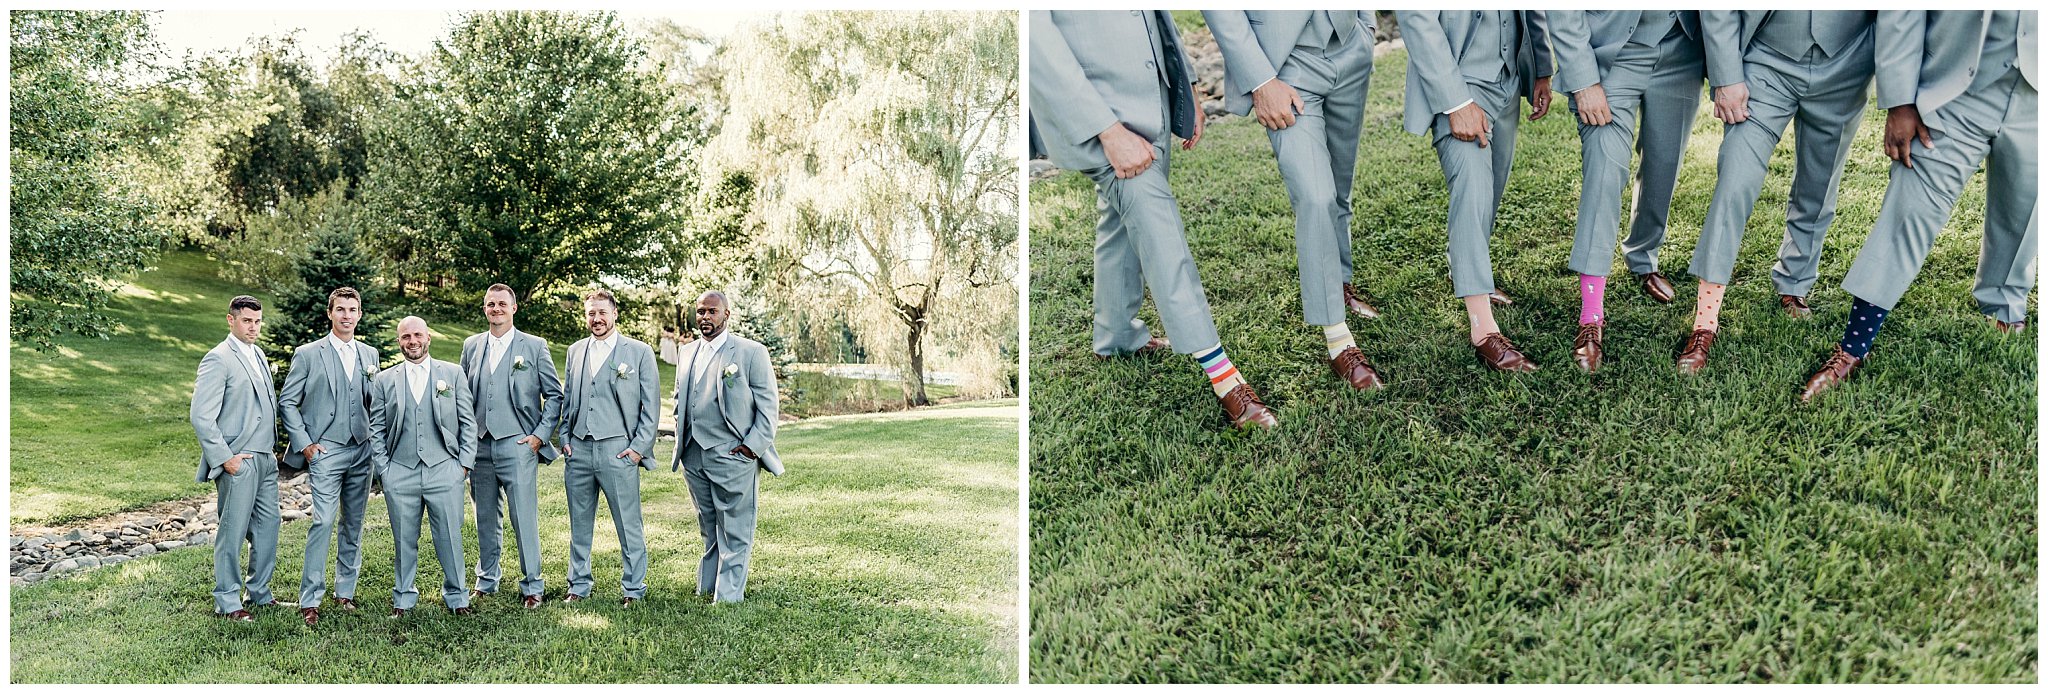 Groomsmen portraits at Rustic Acres Farm in Pittsburgh PA